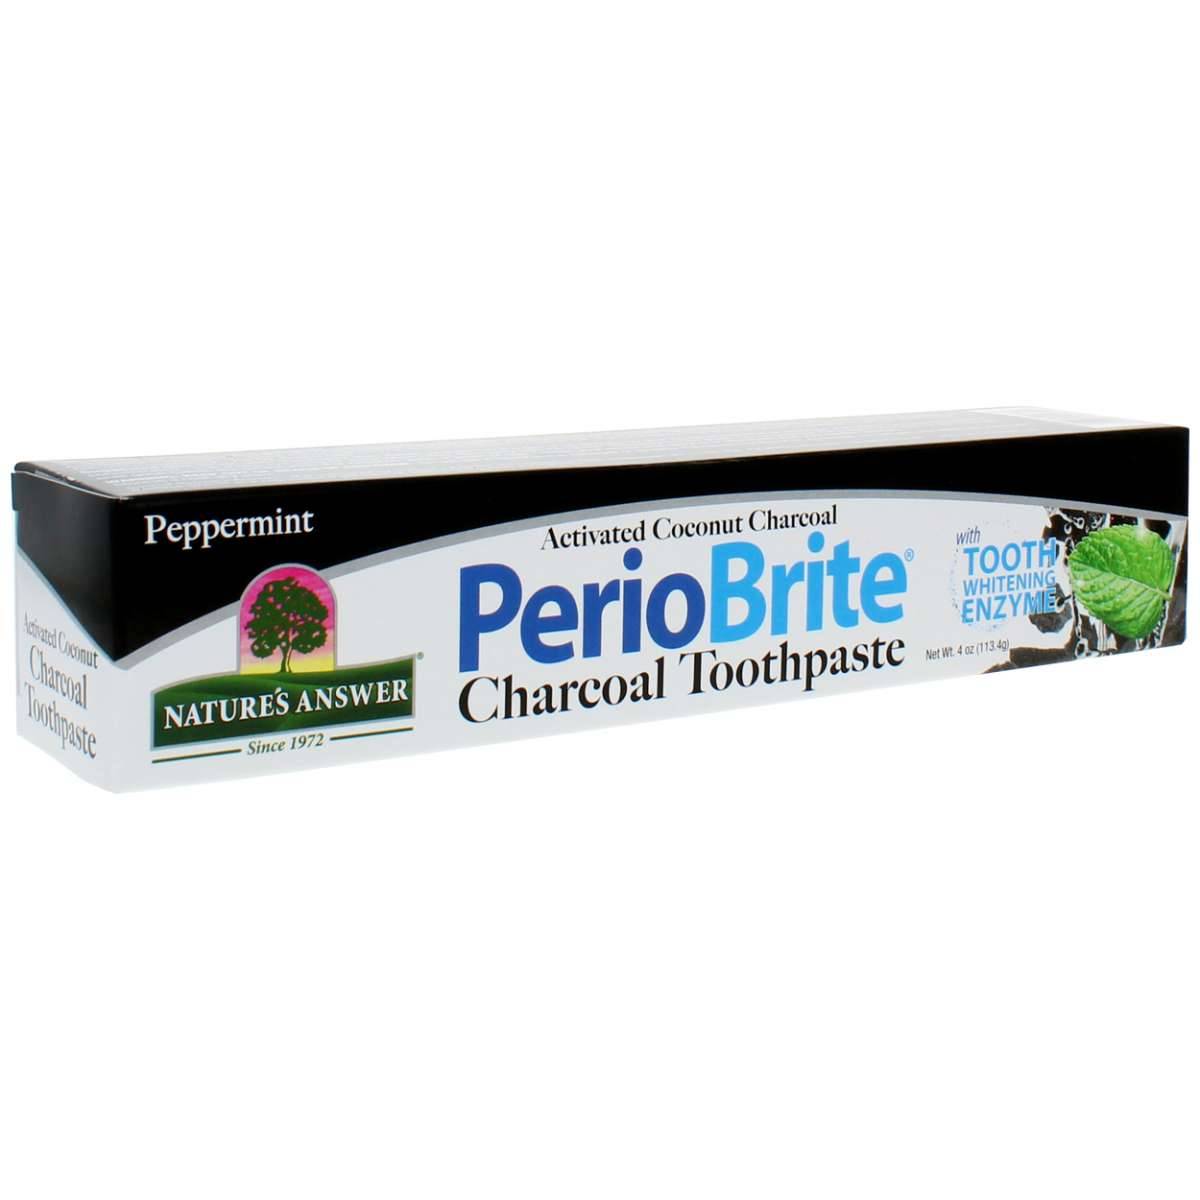 NATURE'S ANSWER: PerioBrite Charcoal Peppermint Toothpaste 4 OUNCE